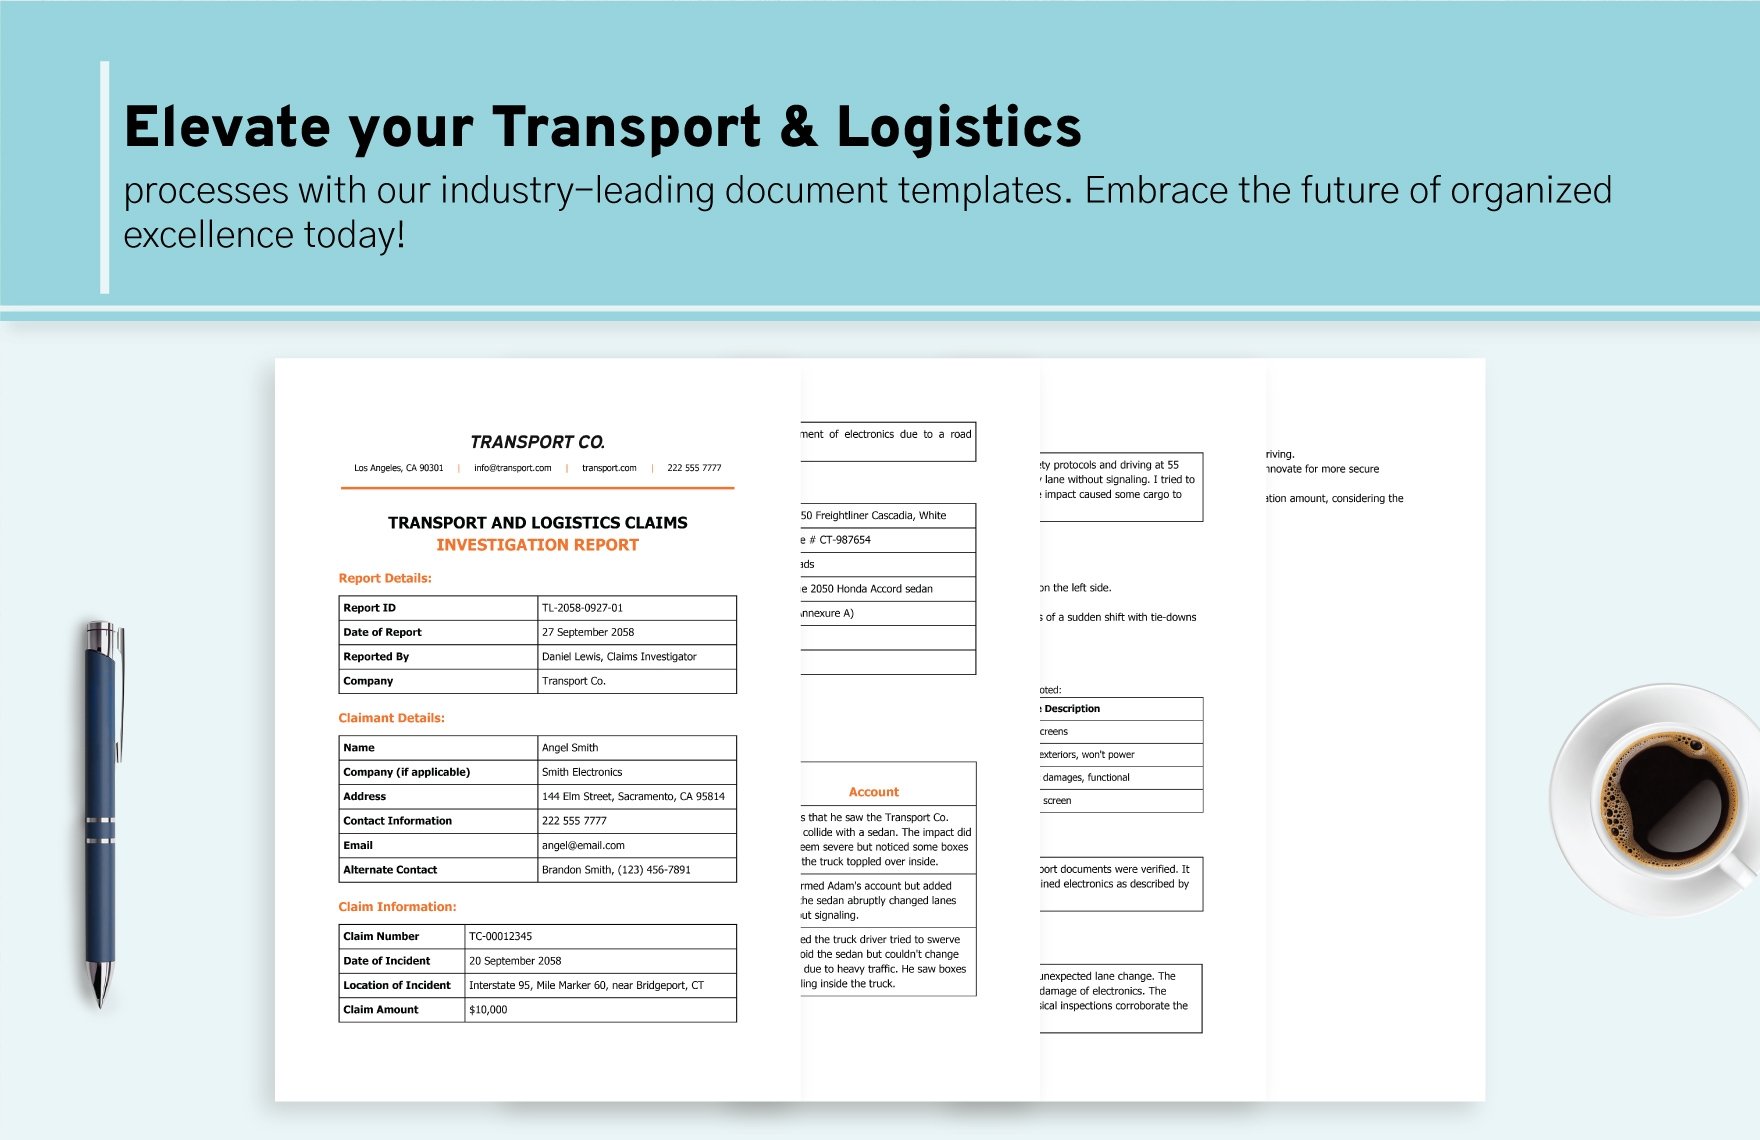 Transport and Logistics Claims Investigation Report Template